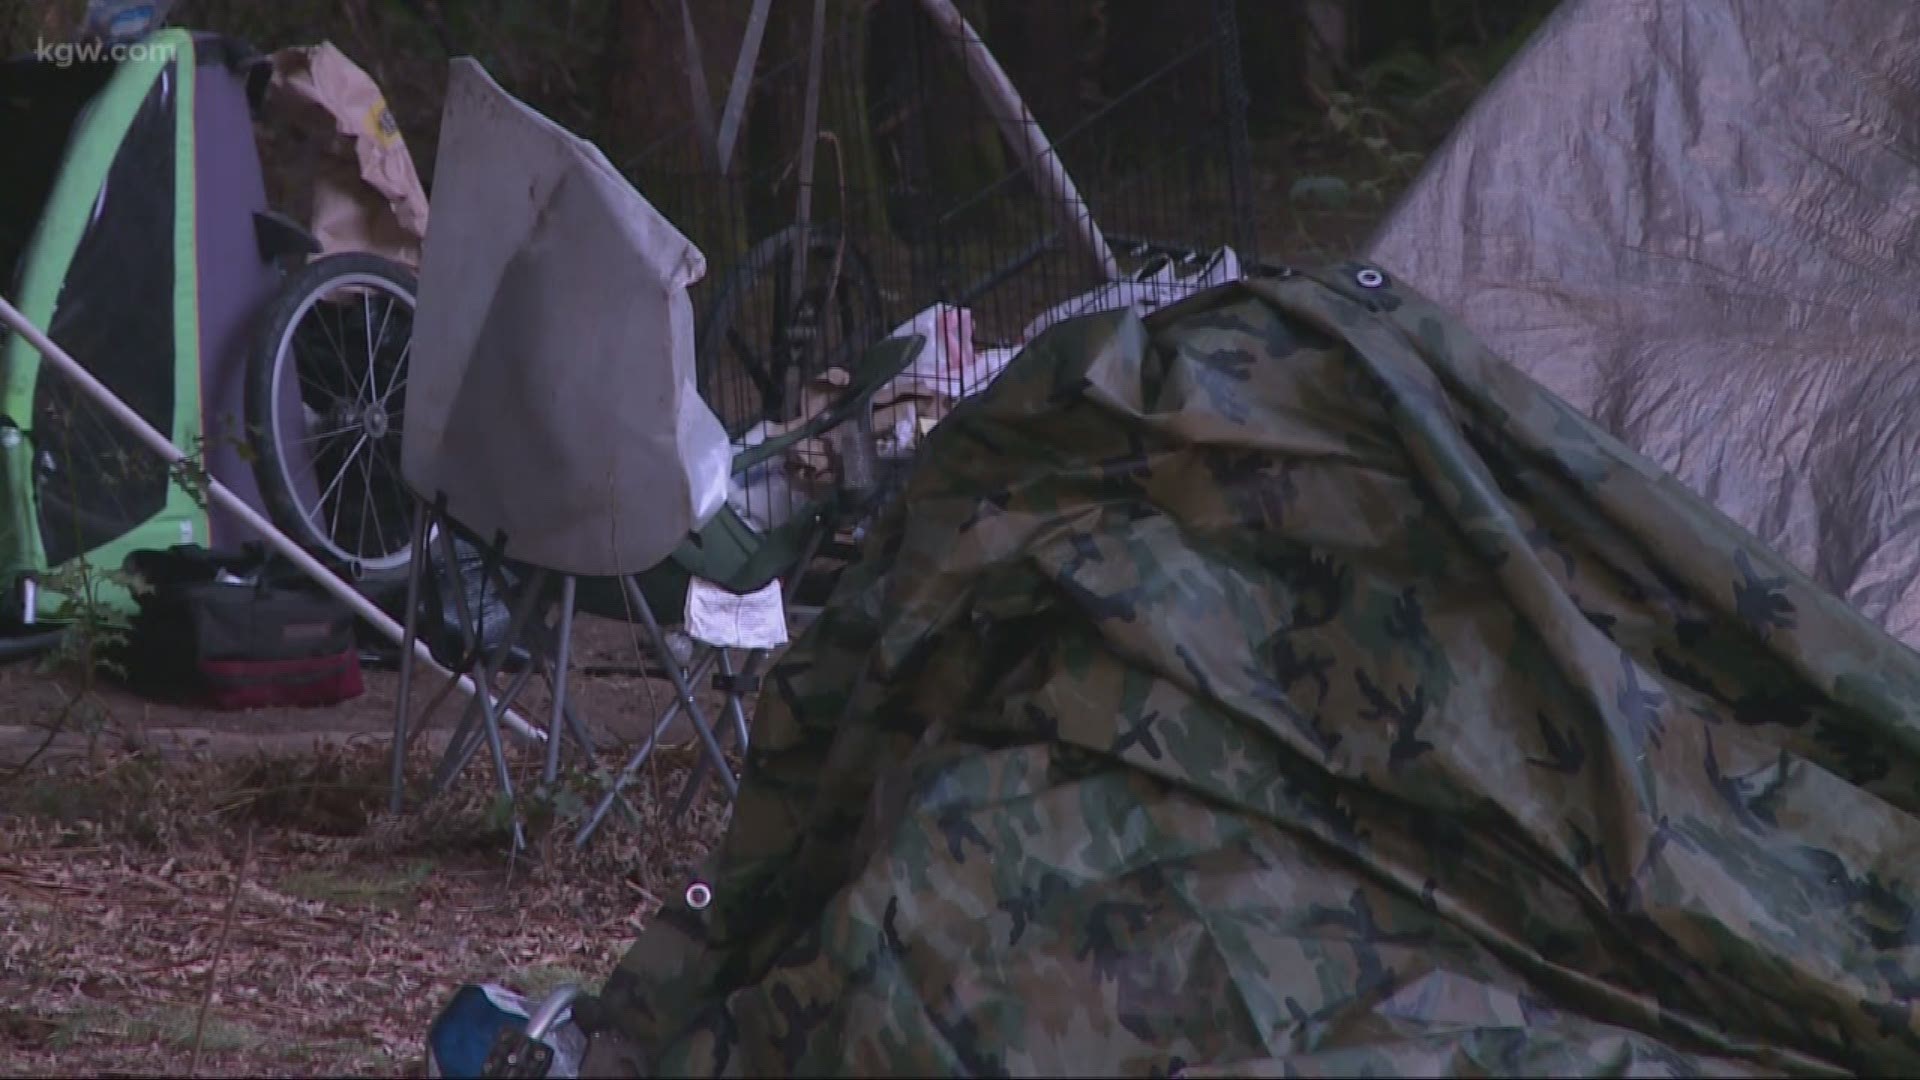 Local authorities tell KGW people have been illegally camping in the woods near First Congregational United Church of Christ for at least a decade.